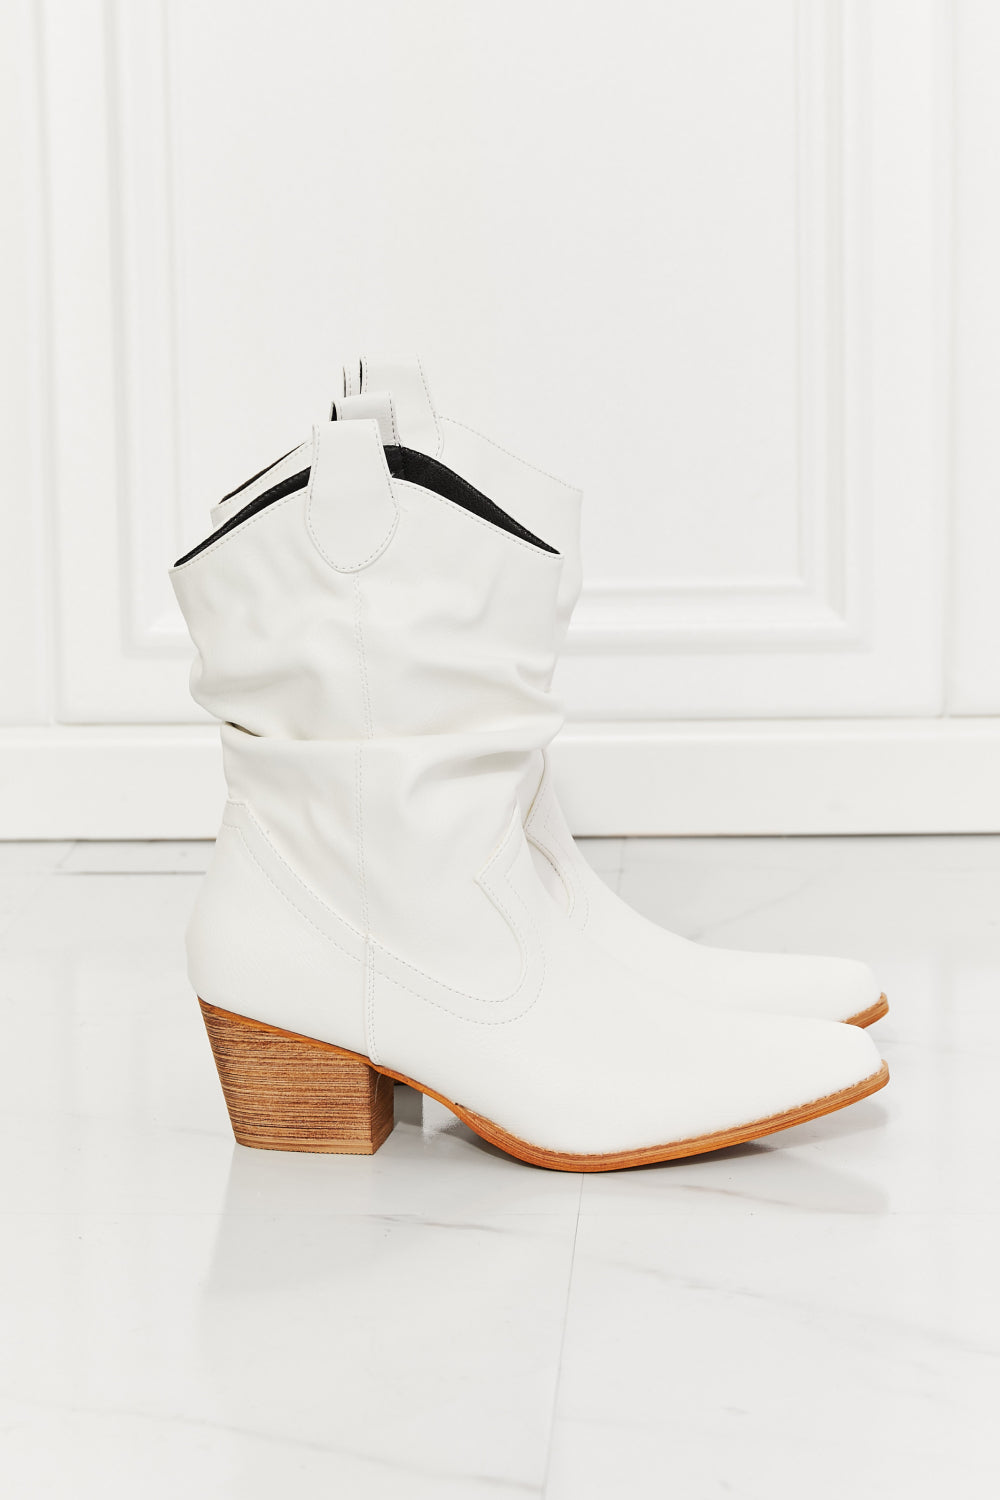 MMShoes Better in Texas Scrunch Cowboy Boots in White - Lecatta